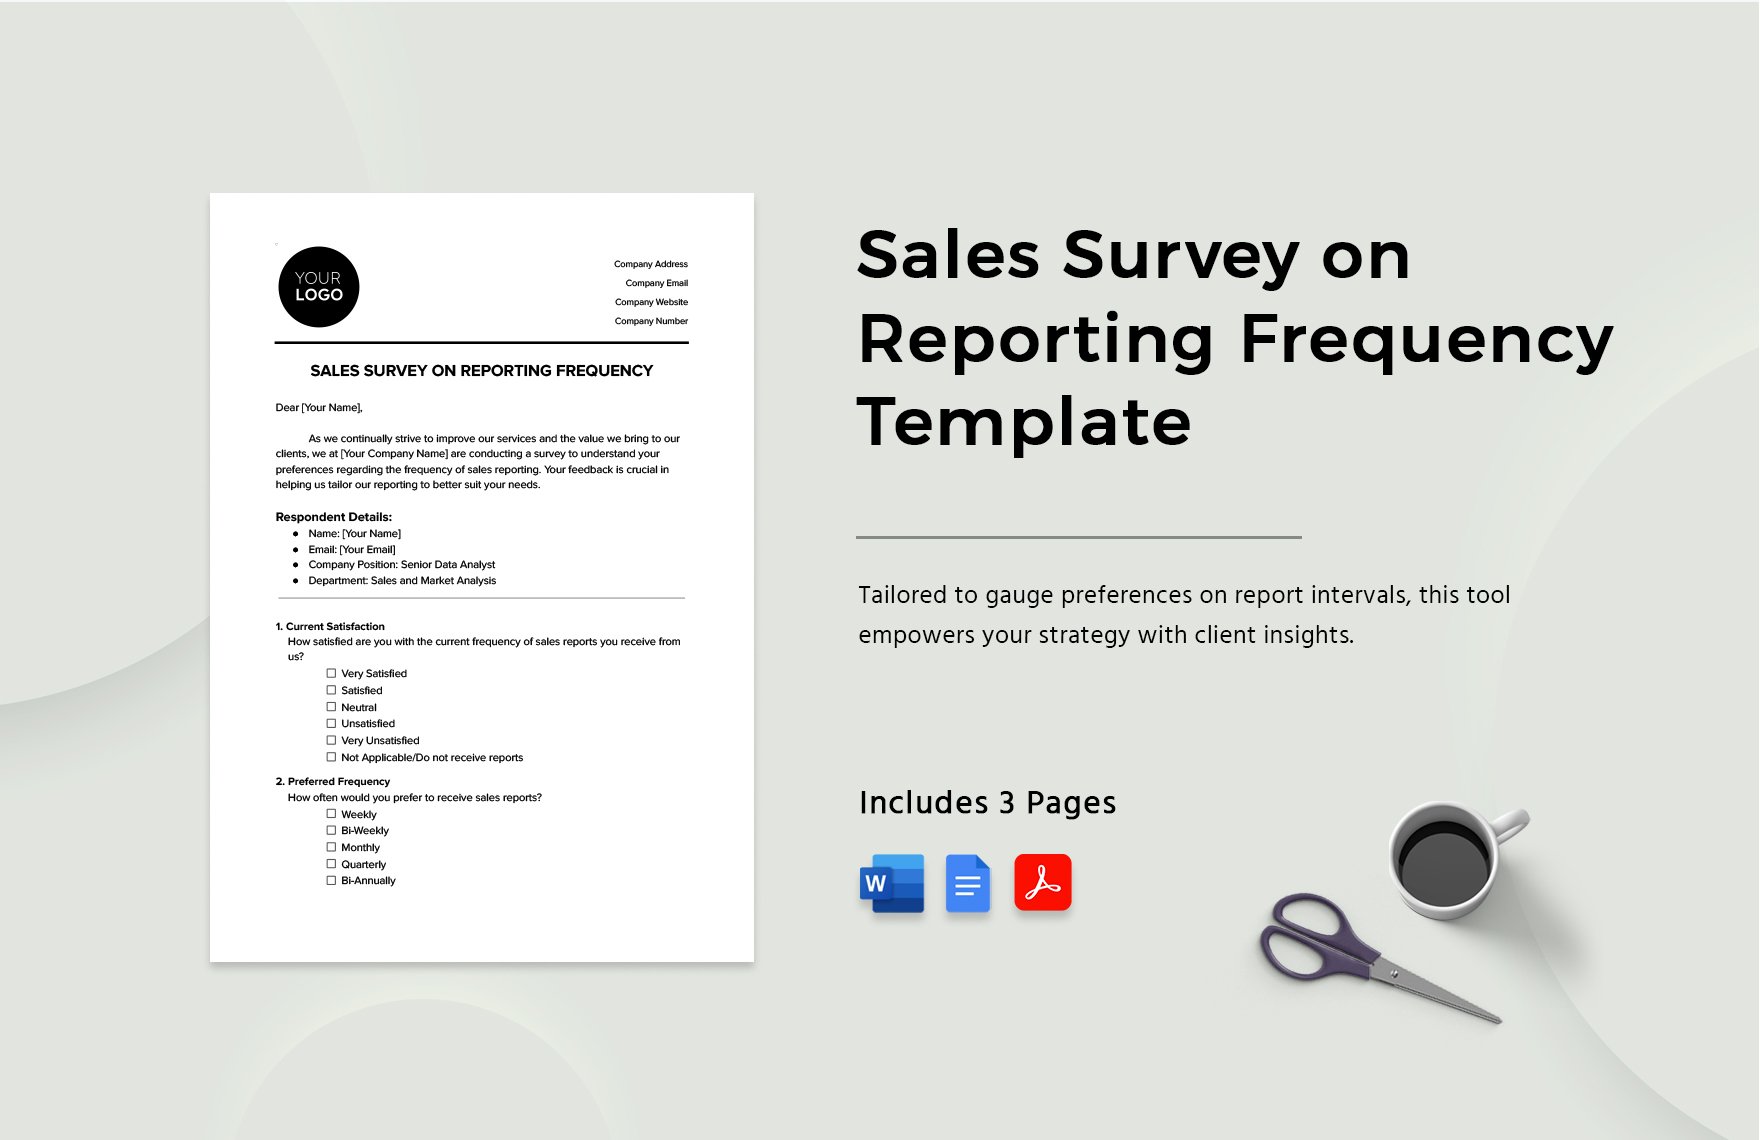 Sales Survey on Reporting Frequency Template